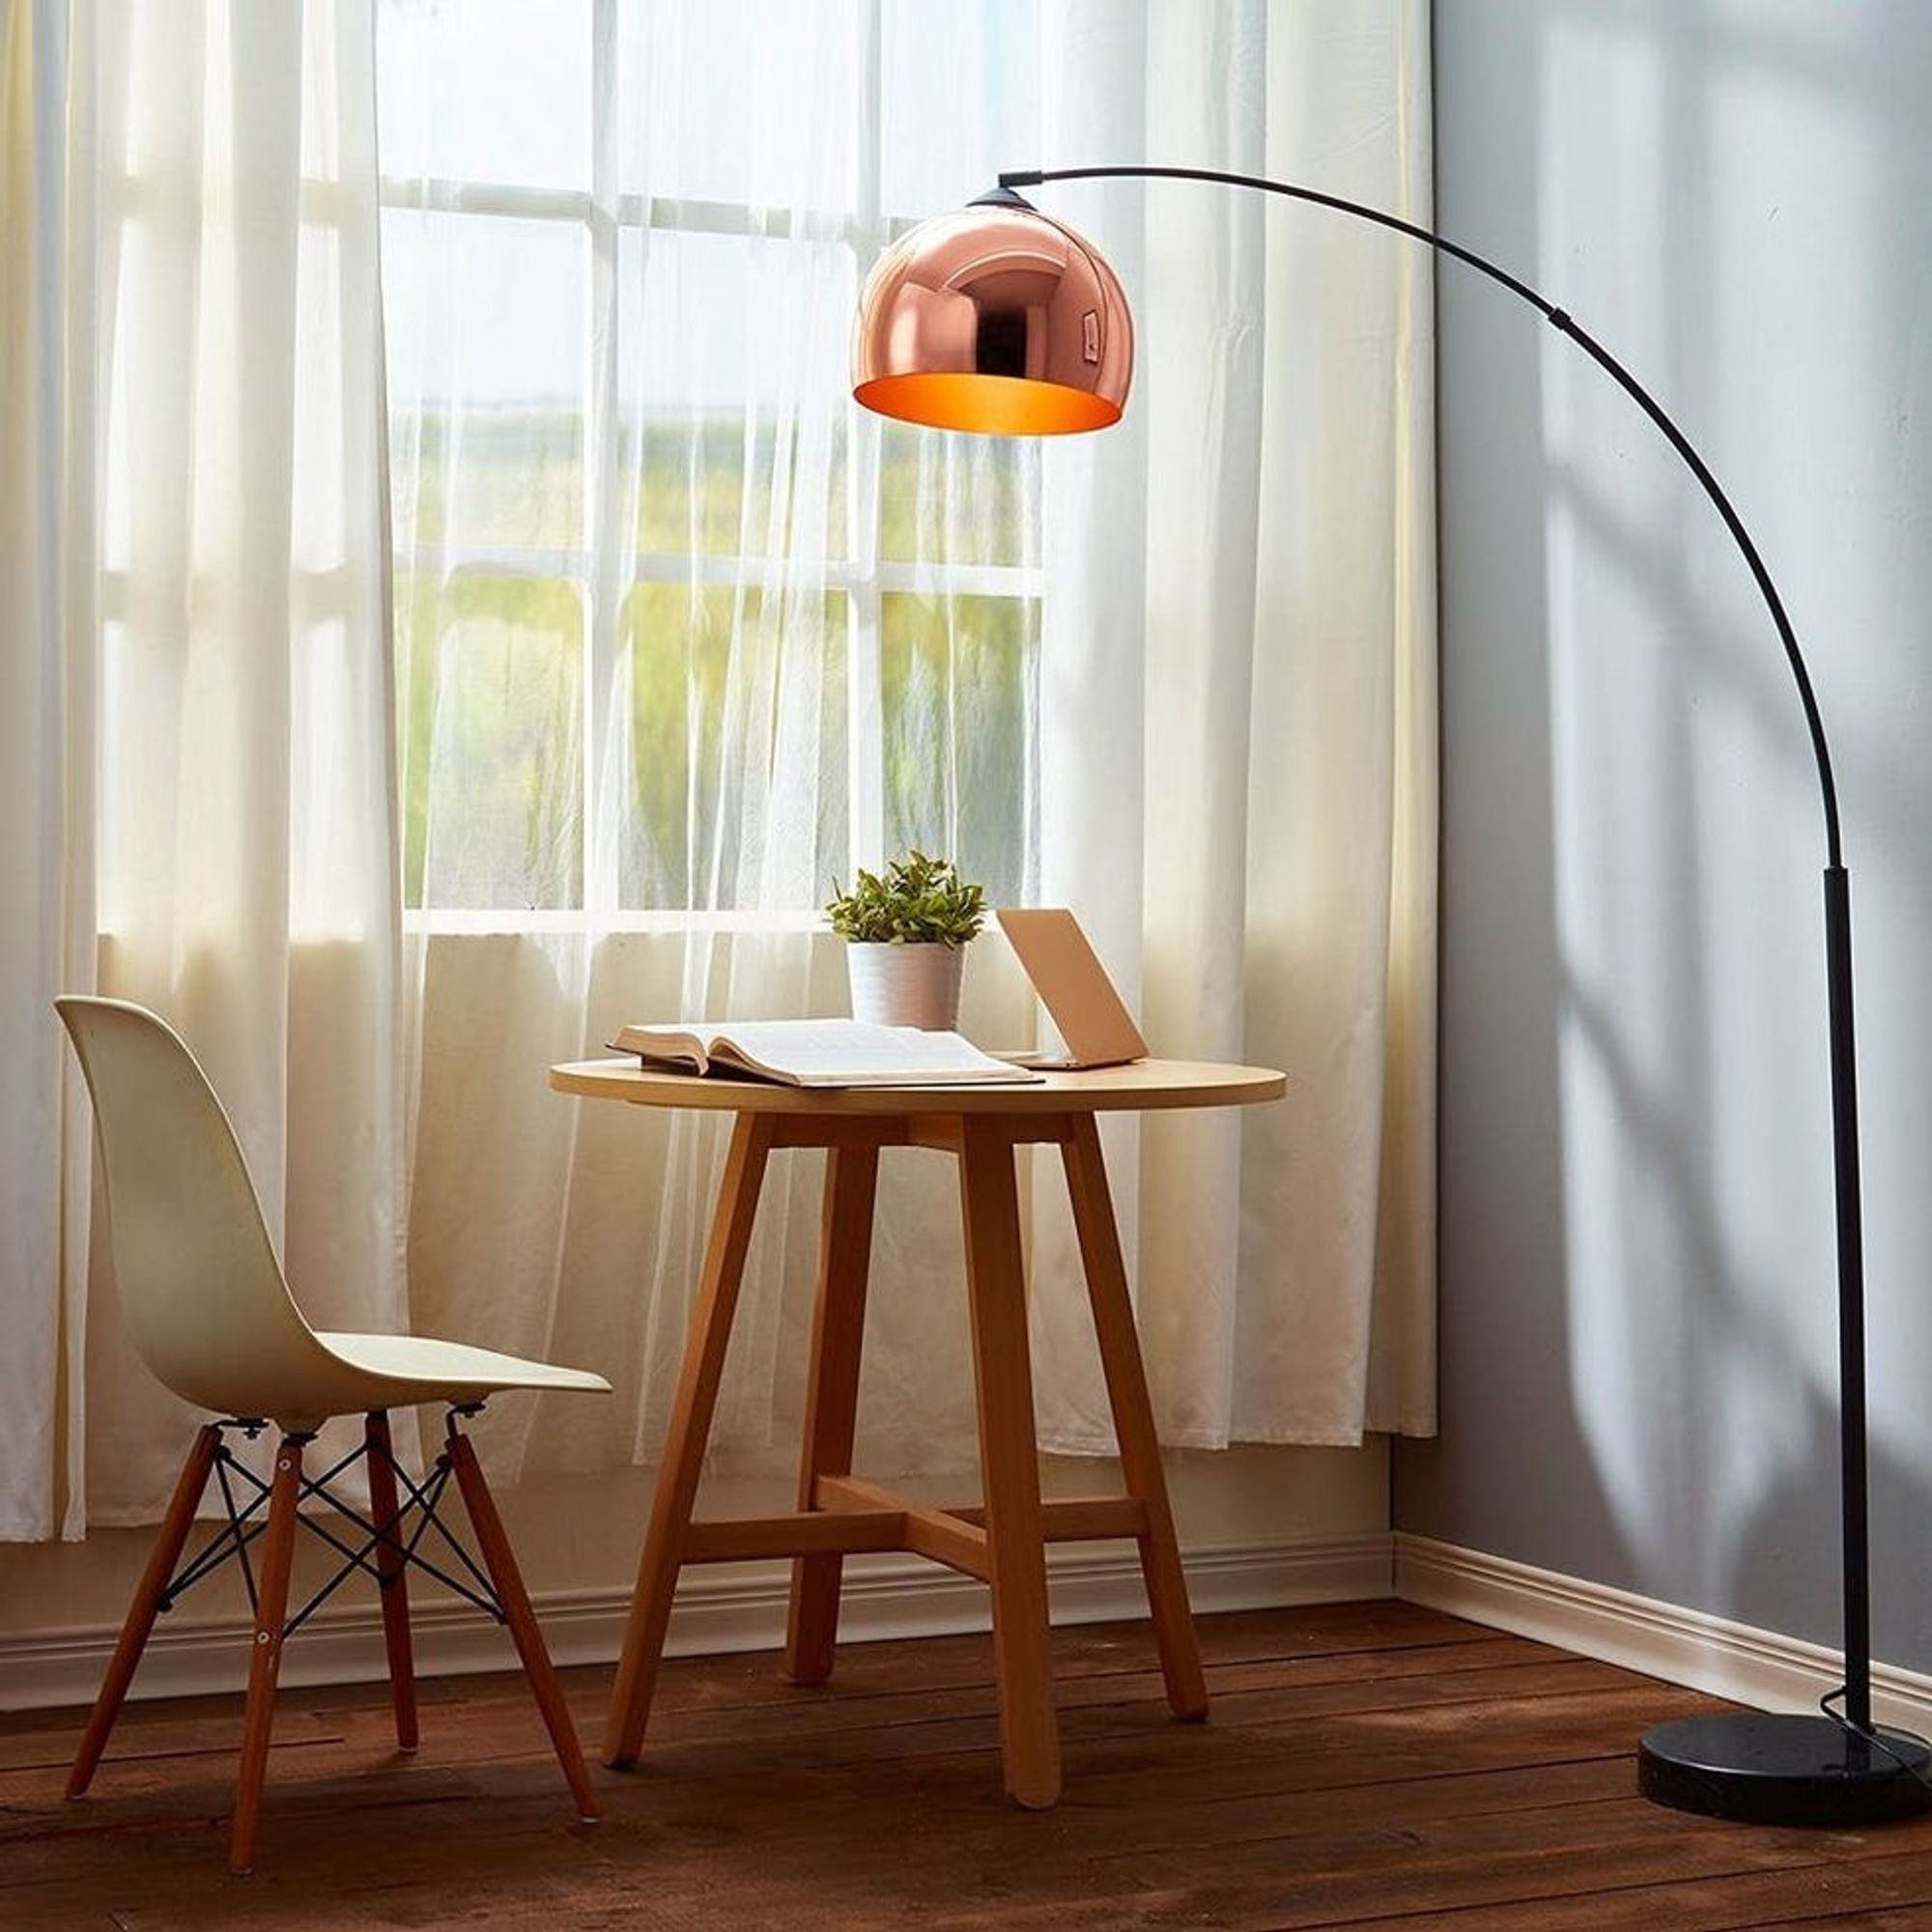 12 Stylish Floor Lamps You Can Buy on Amazon Right Now   Brit + Co